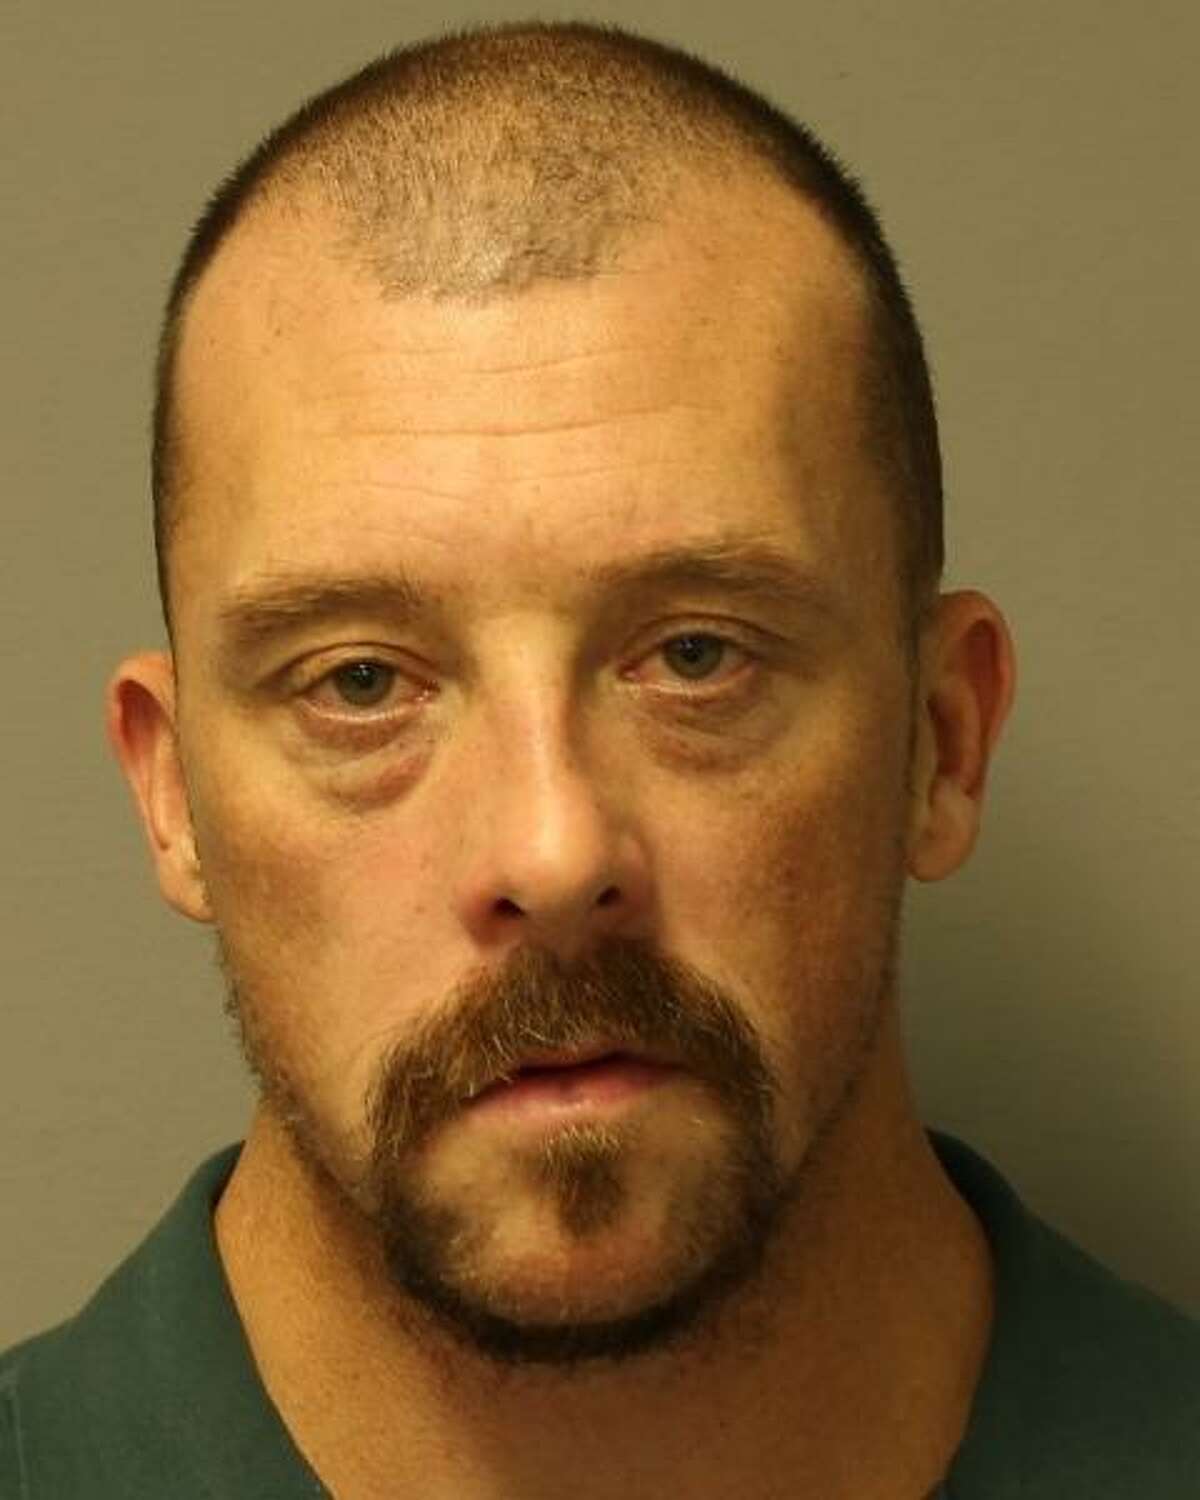 HOOSICK FALLS ?— A Cossayuna man is accused of striking a dog with the blunt side of an ax and burying it in the back yard, village police said Thursday. Police arrested Jason Jenkins, 39, of 181 Kilburn Road under the state Agriculture and Market Law for aggravated cruelty to animals, also known as Buster's Law.